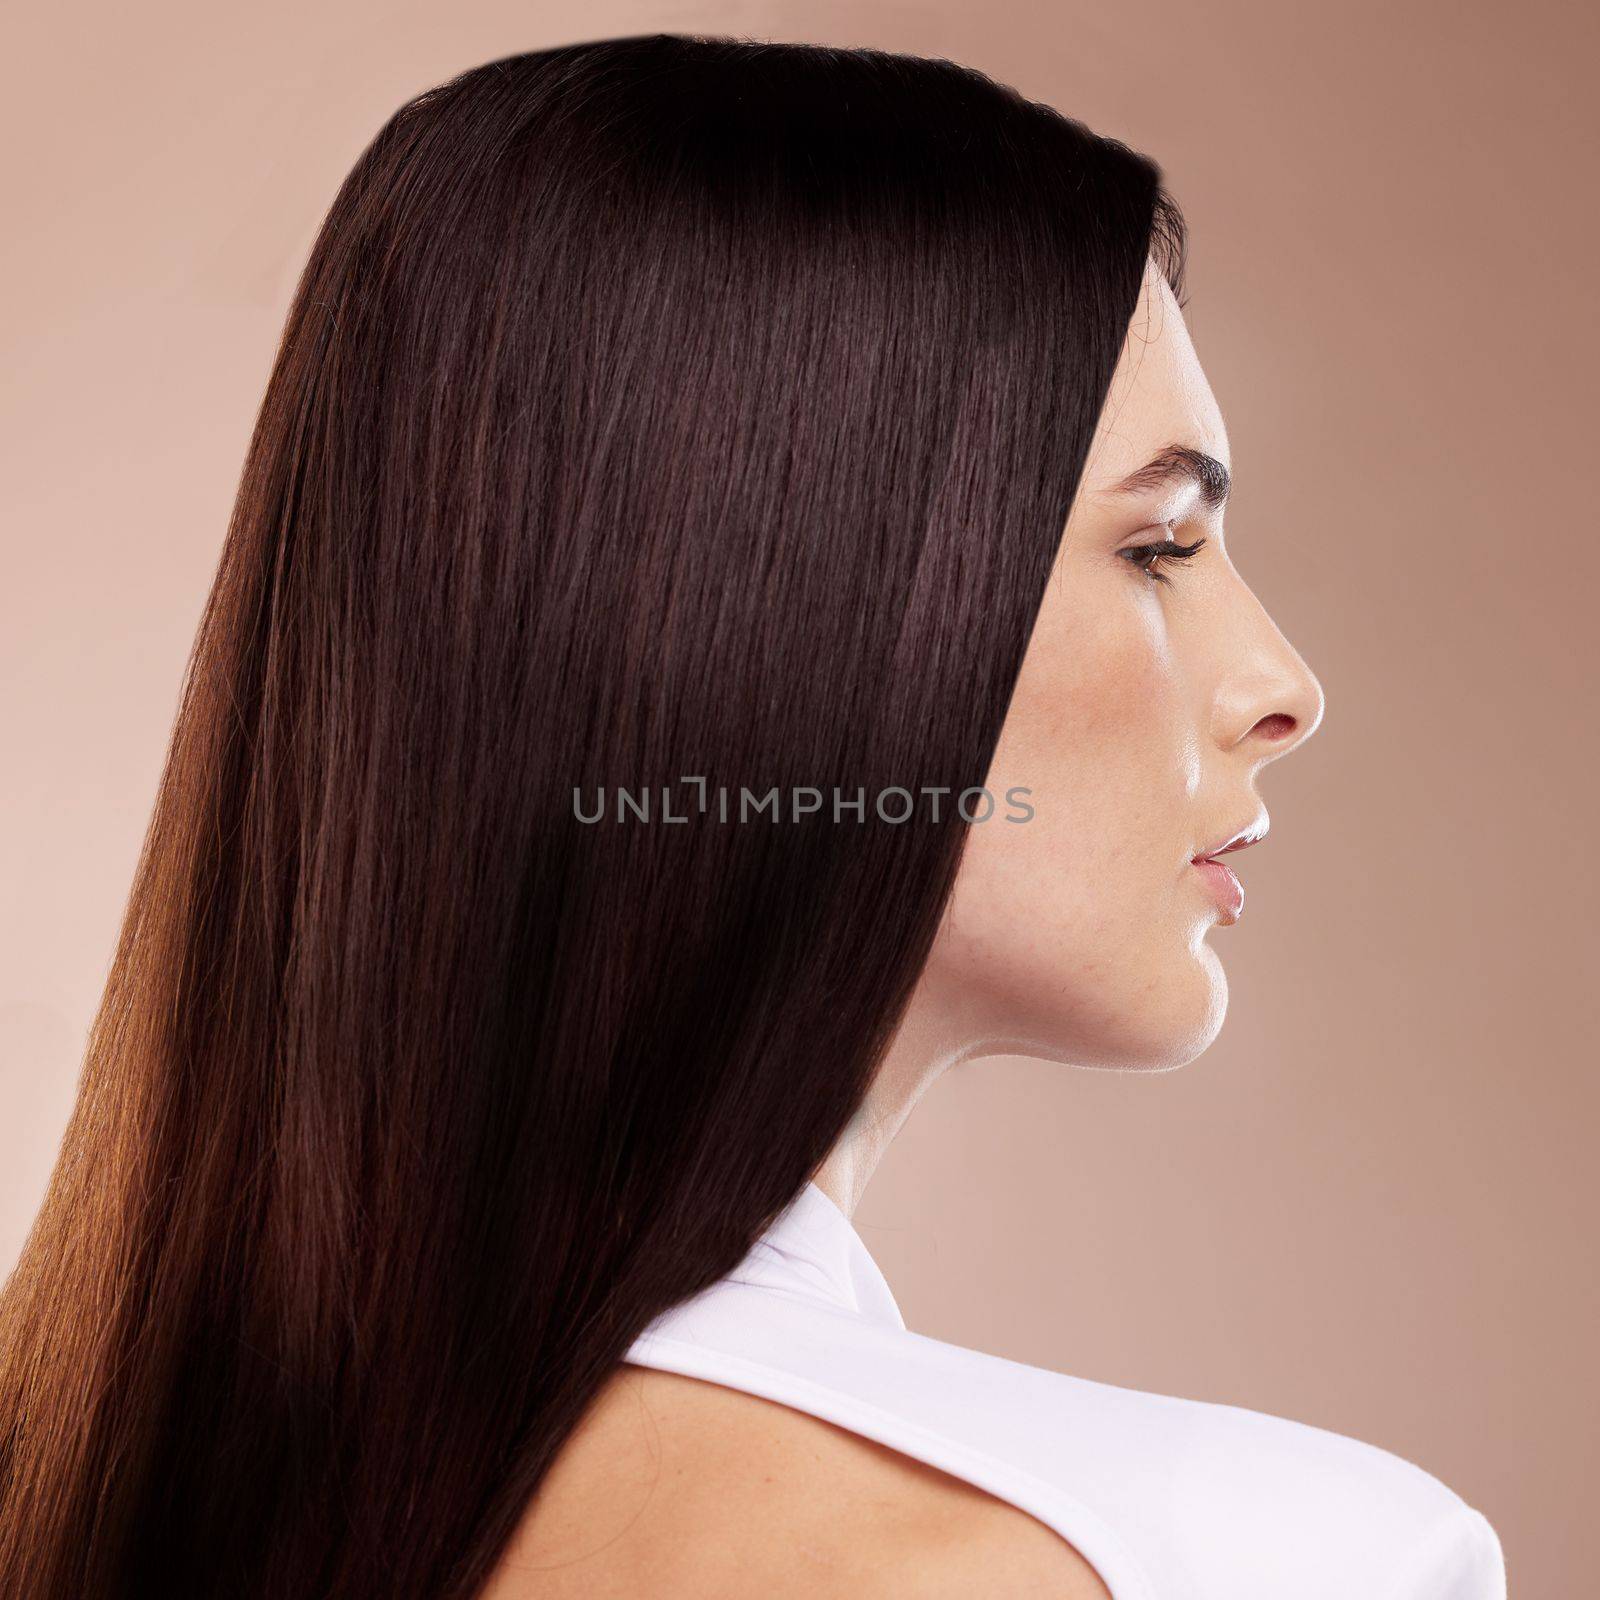 Face profile, beauty and hair care of woman in studio isolated on a brown background. Balayage, hairstyle and young female model with healthy, beautiful and long hair after salon treatment for growth.